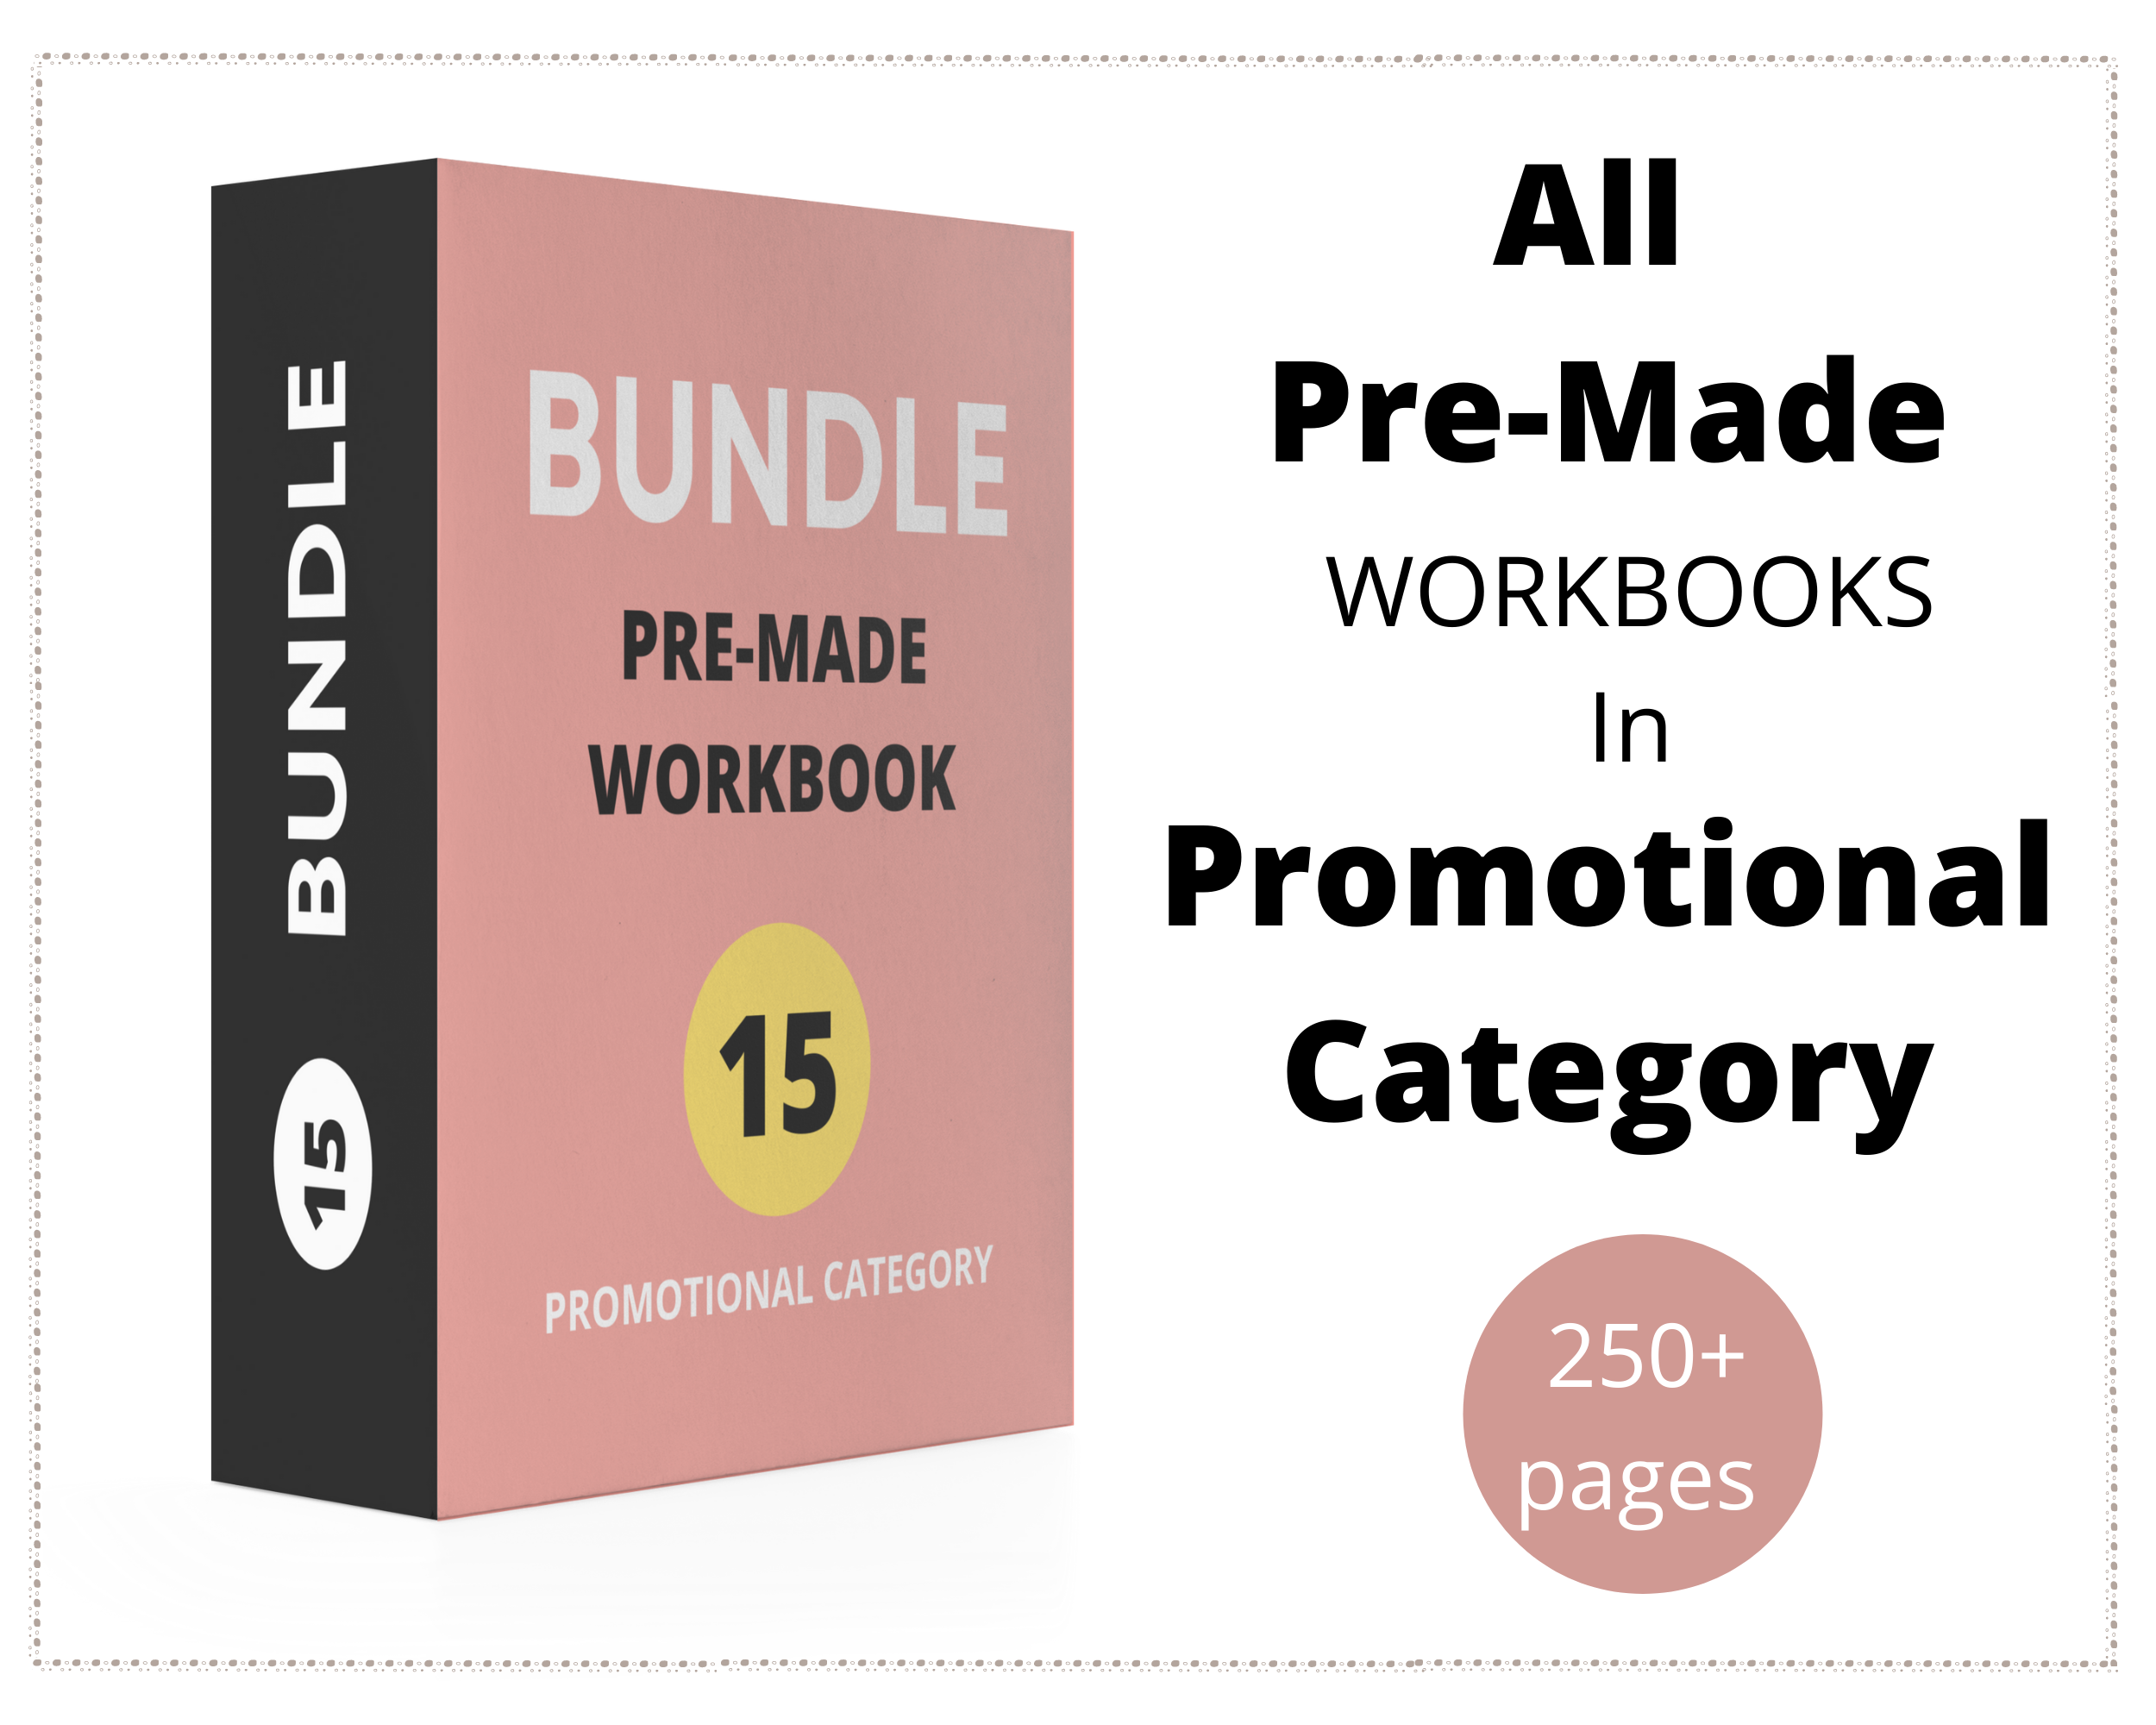 BUNDLE of 15 Promotional Workbooks | All Access to Everything in Promotional Workbooks Category | Big Bundle of Workbooks